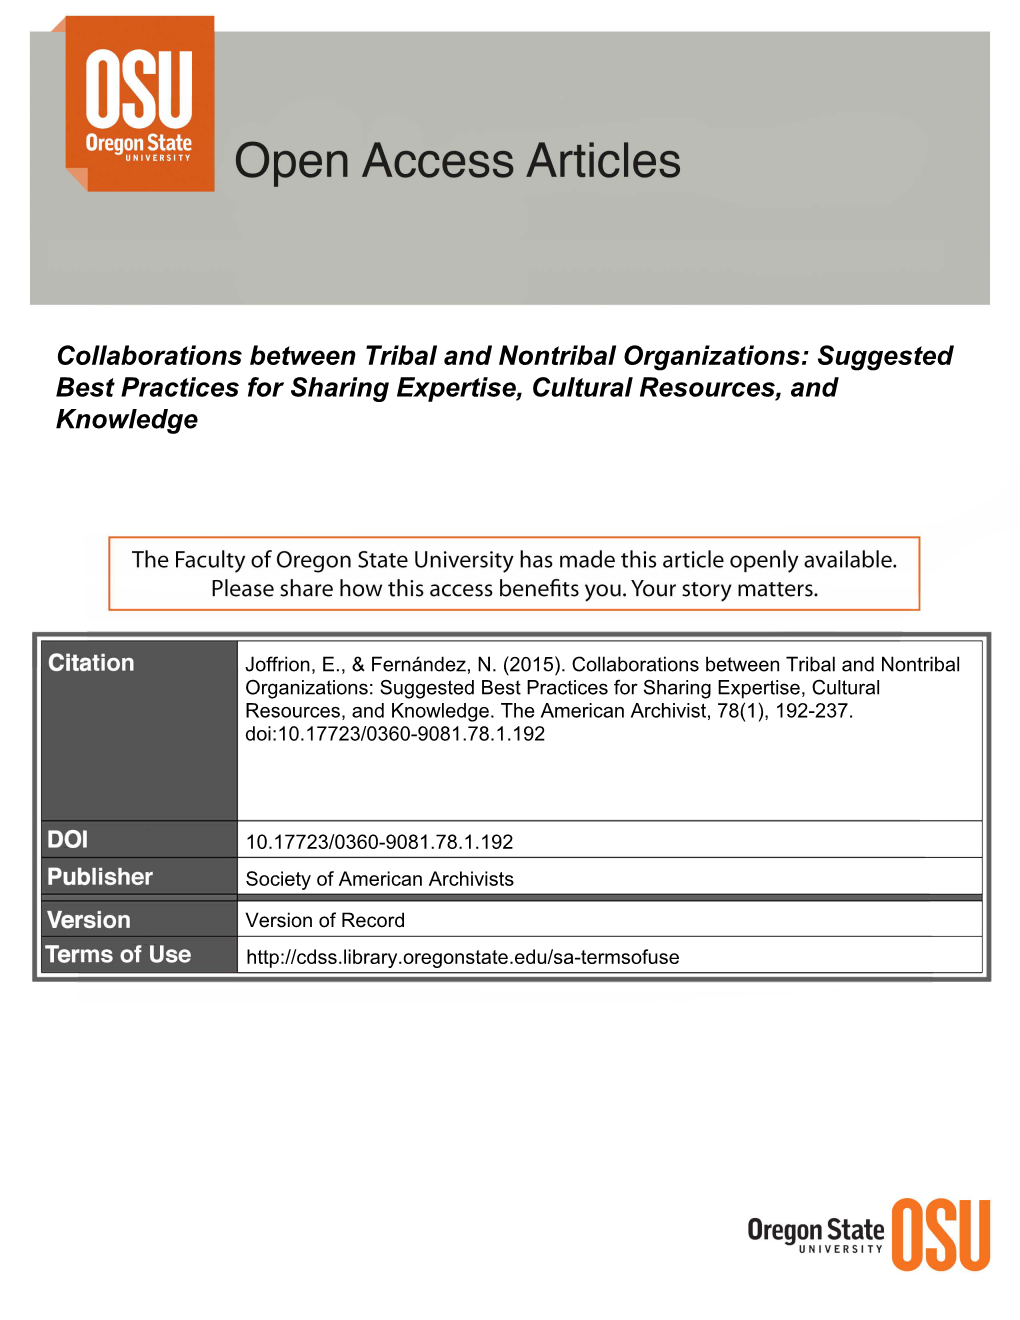 Collaborations Between Tribal and Nontribal Organizations: Suggested Best Practices for Sharing Expertise, Cultural Resources, and Knowledge